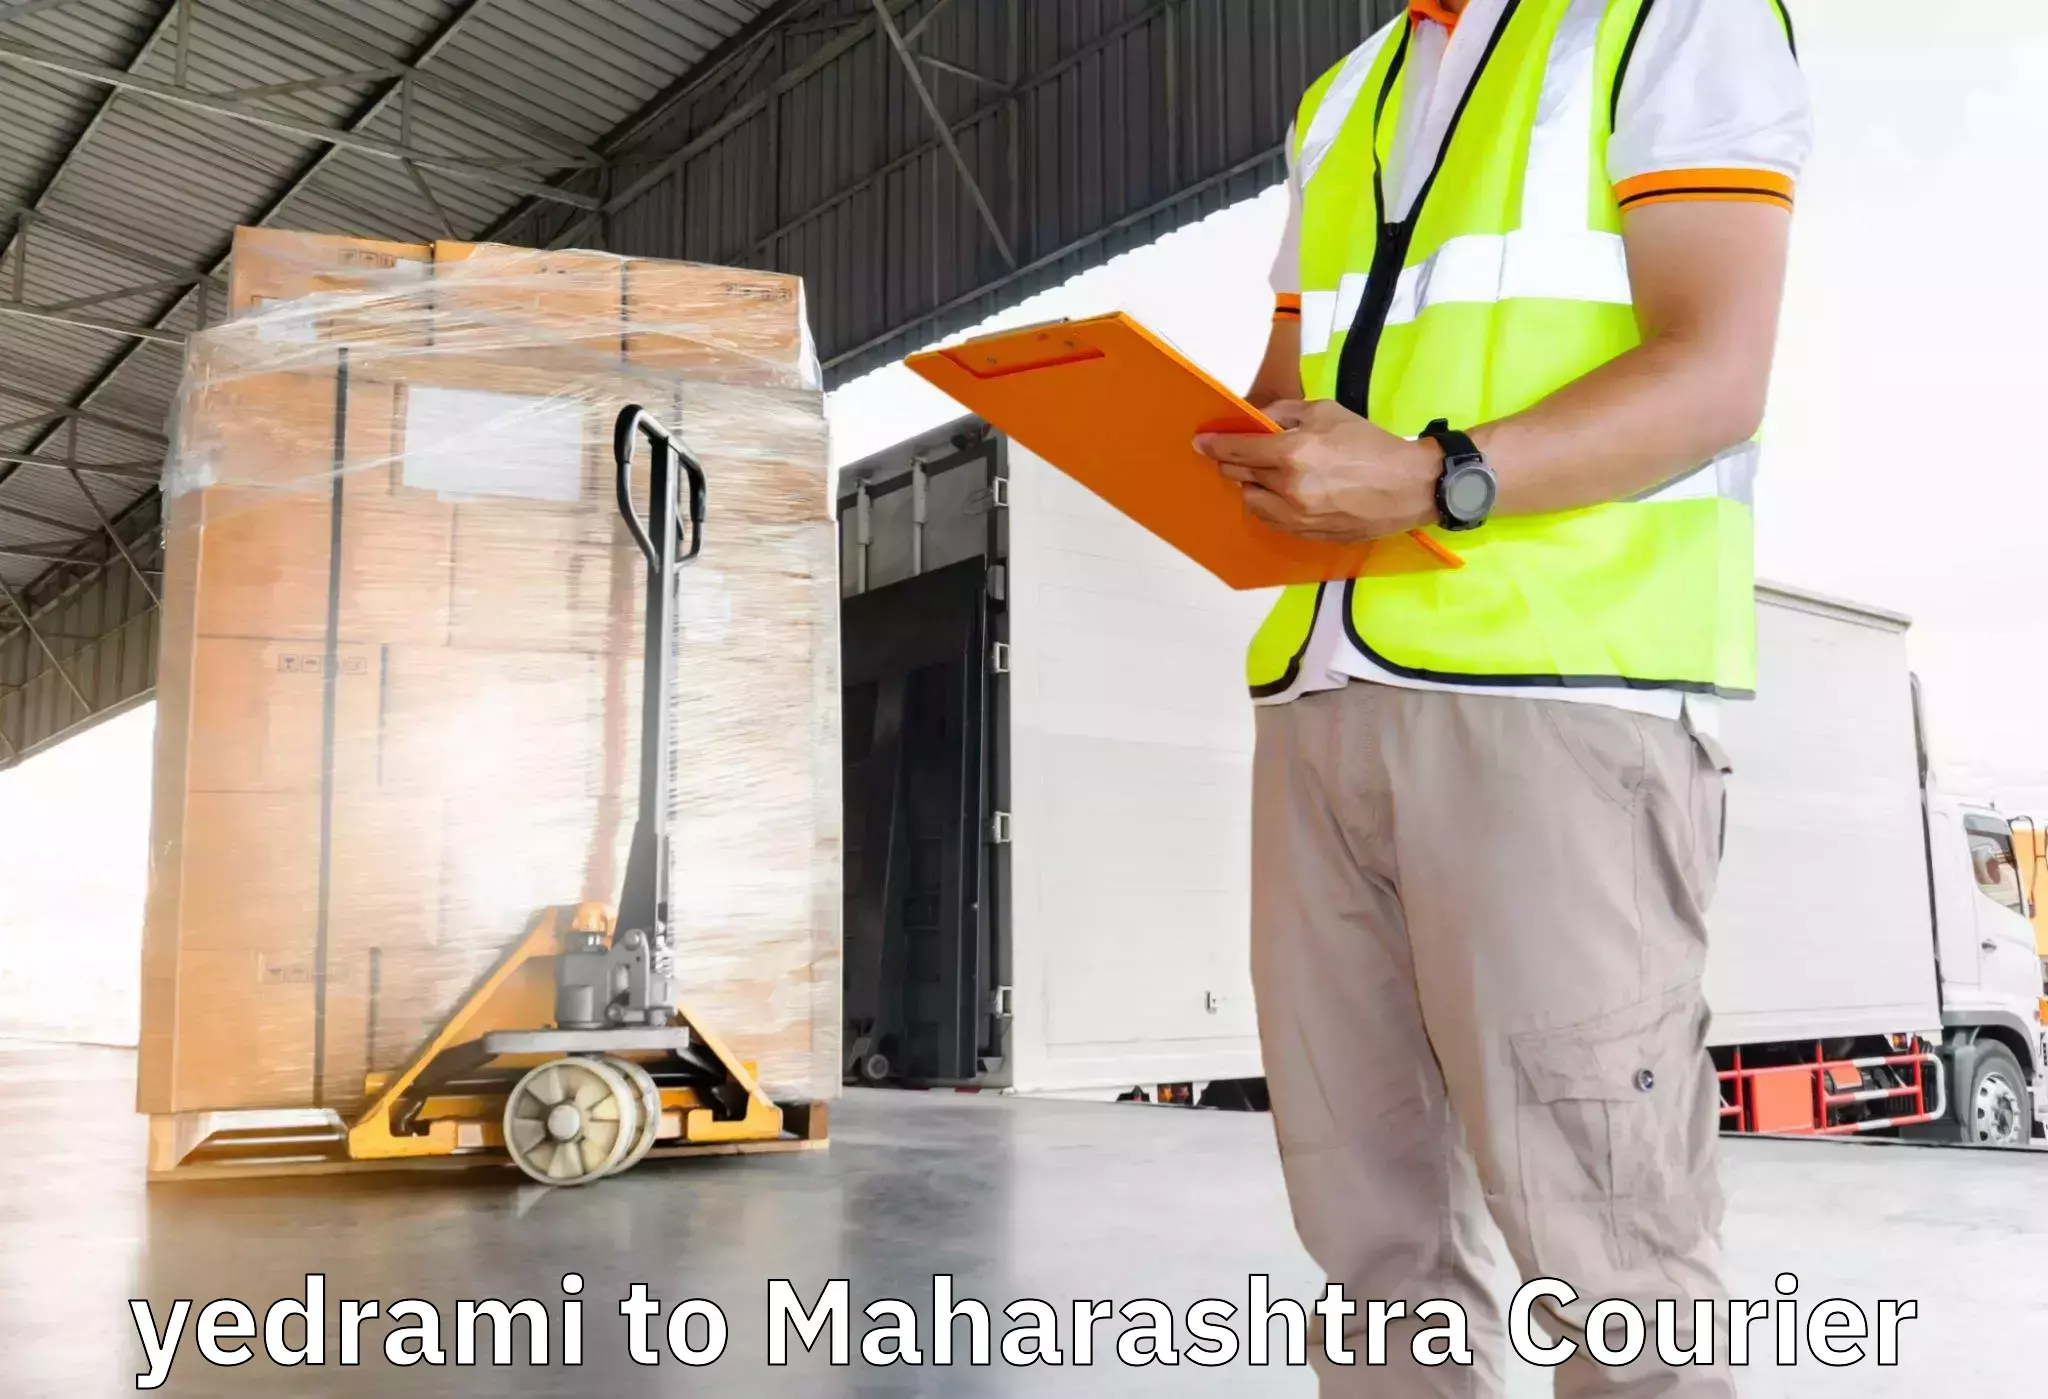 Furniture transport specialists in yedrami to Shegaon